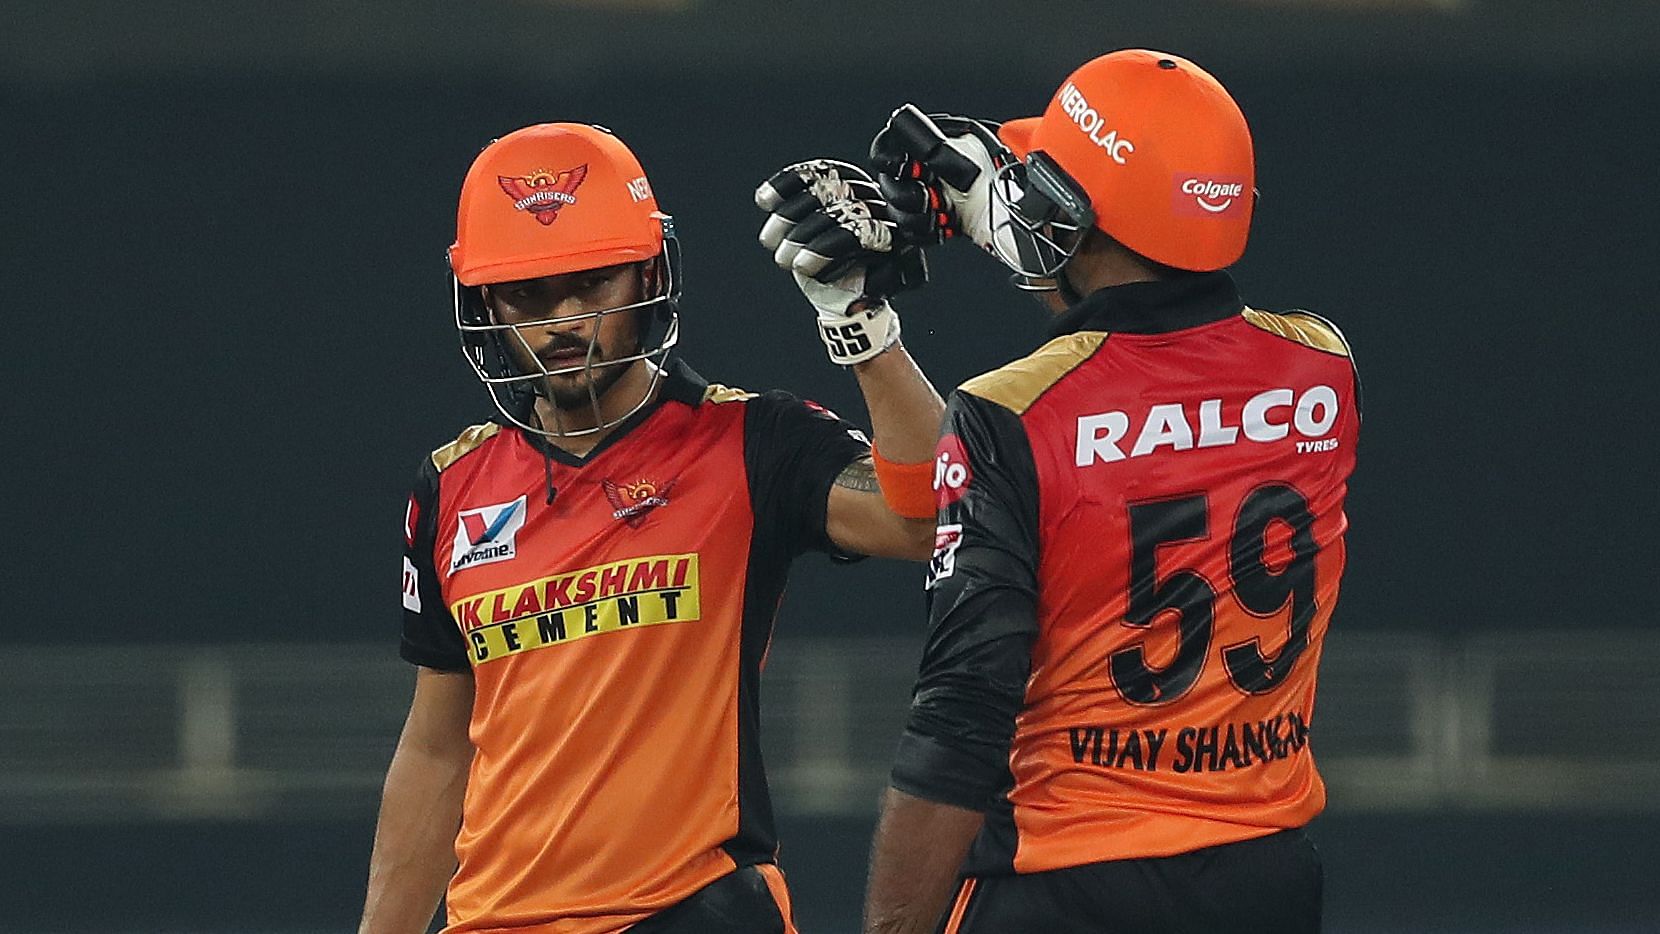 Sunrisers Hyderabad (SRH) cruised to an eight-wicket win over Rajasthan Royals (RR).